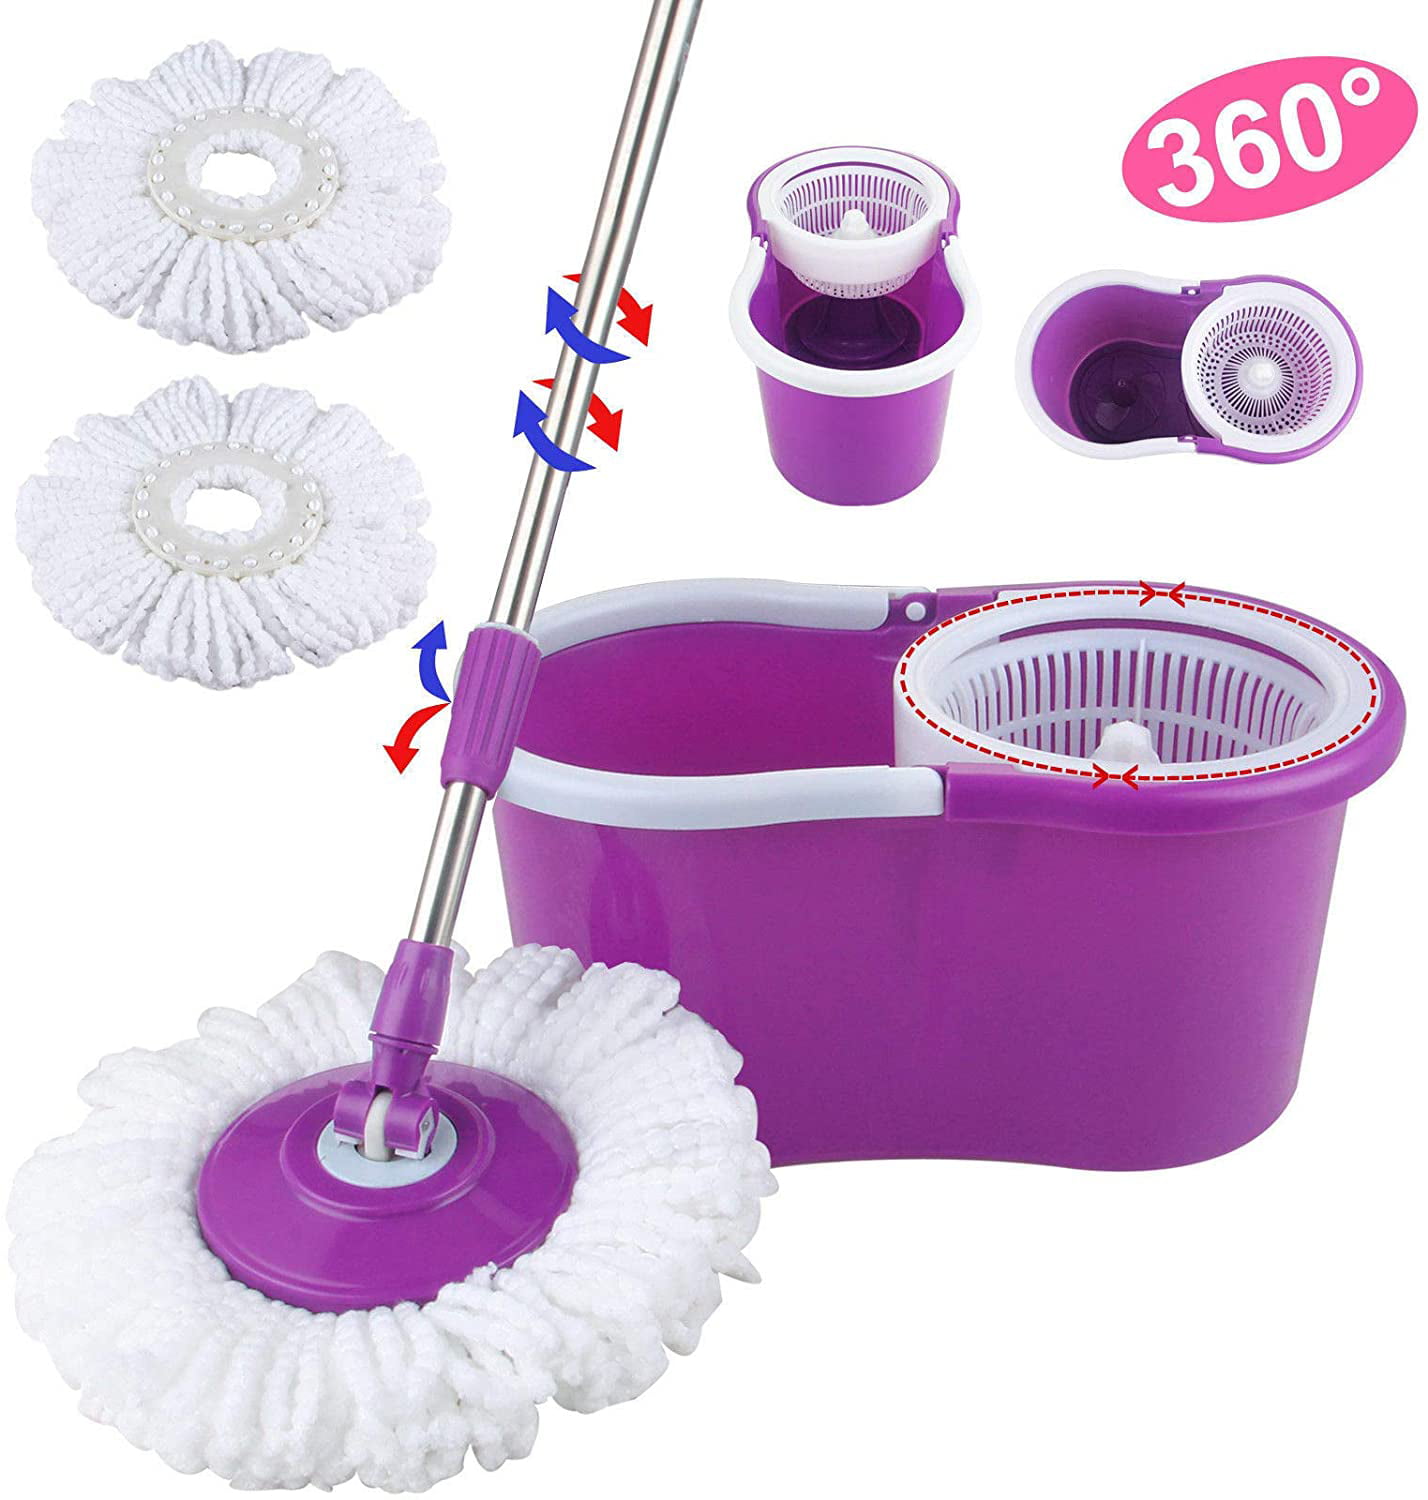 Spin Mop - for Home Kitchen Floor Cleaning - Wet/Dry Usage on Hardwood